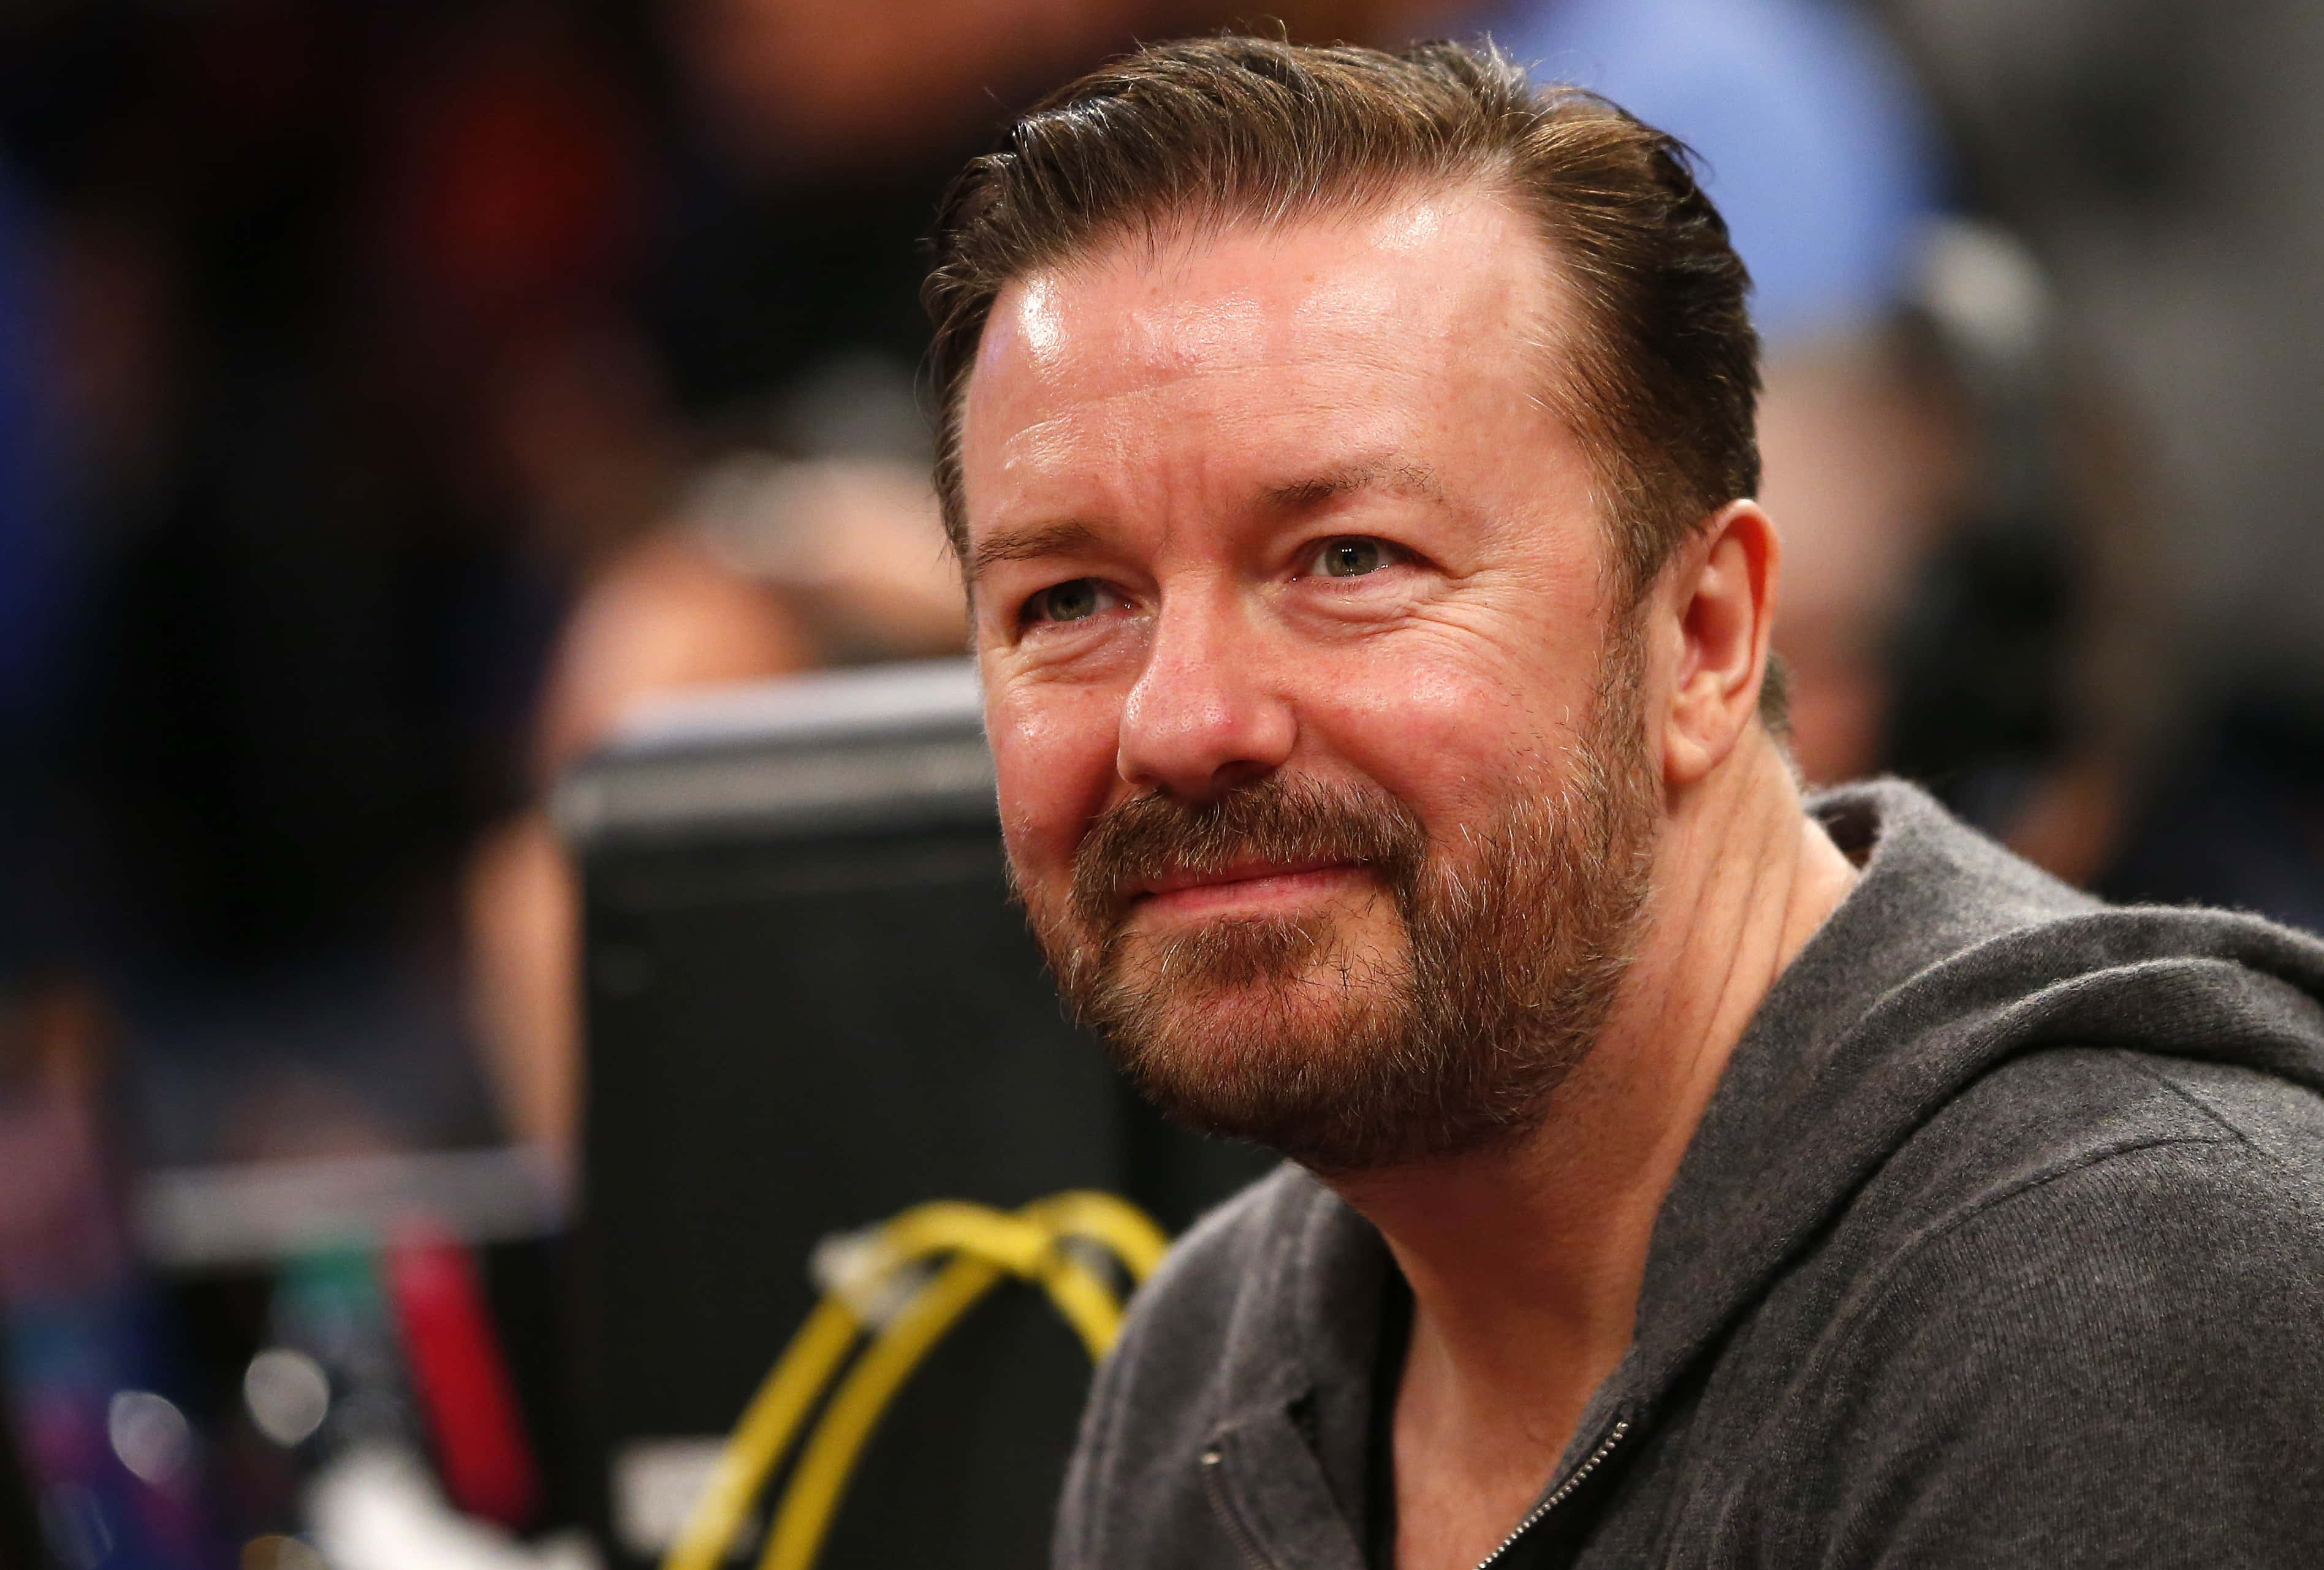 Ricky Gervais making an iconic facial expression Wallpaper